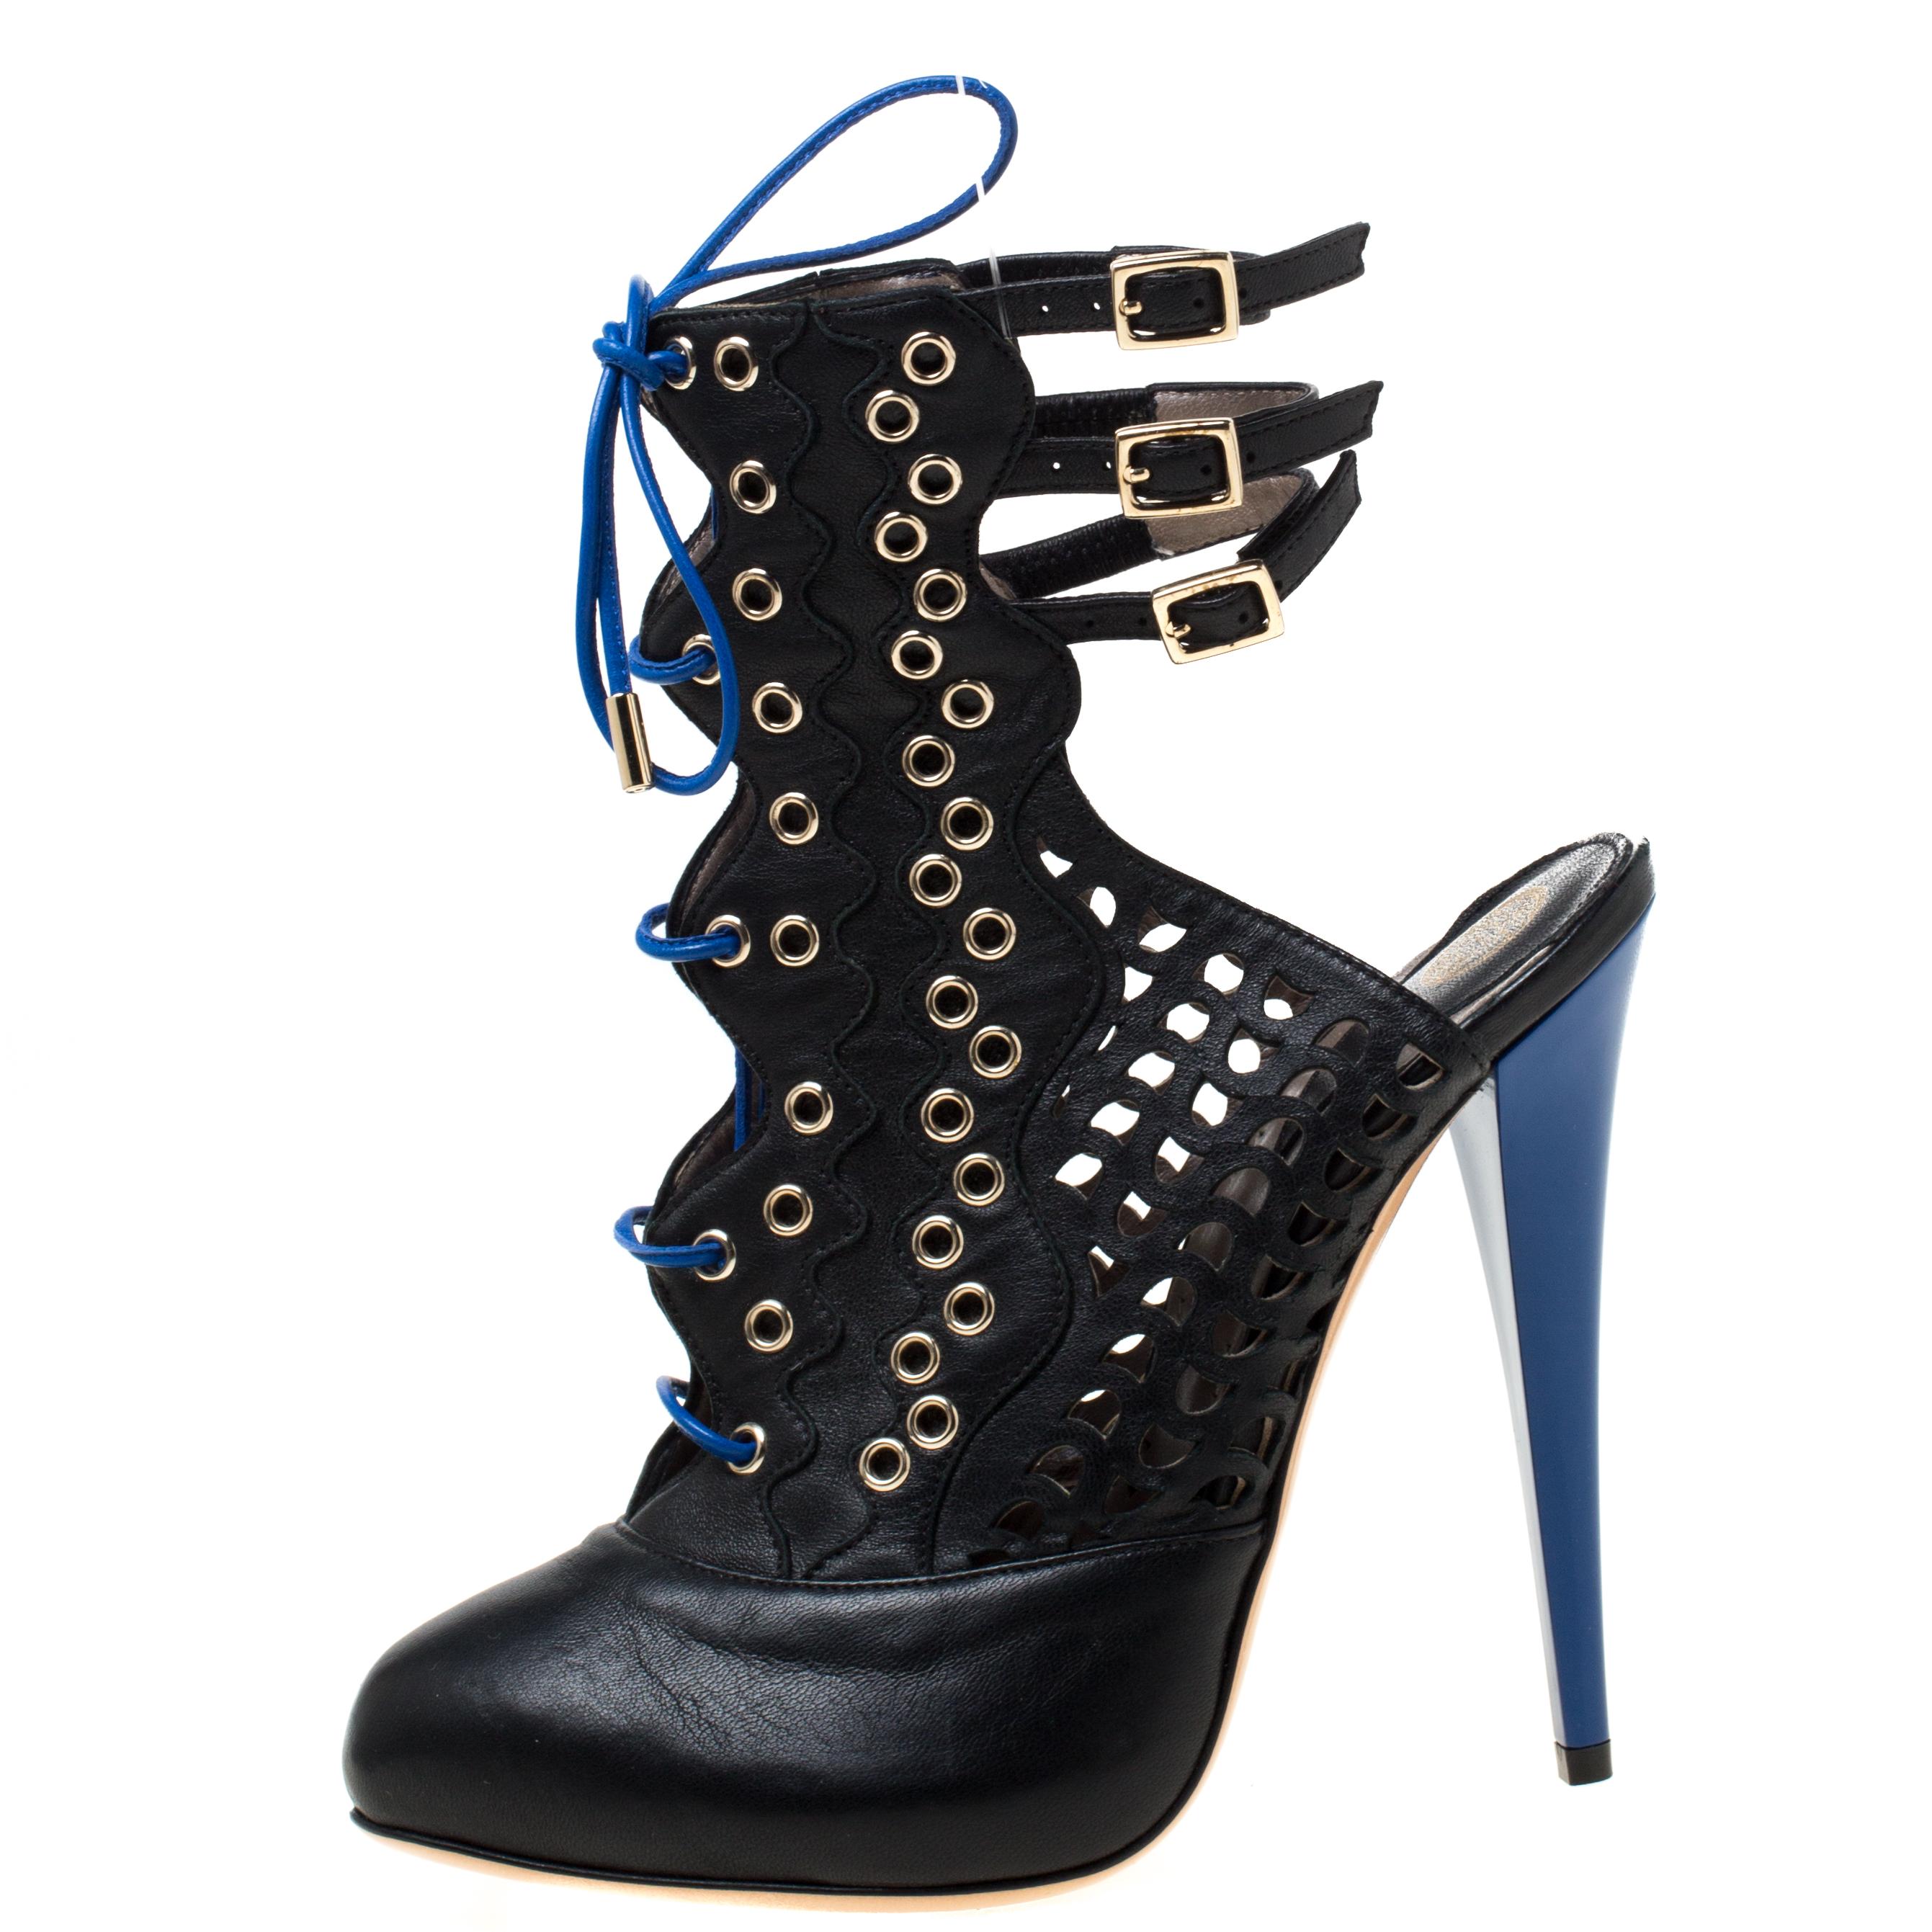 Don't miss out on making these leather booties yours this season. They are by Versace, carefully crafted to exude nothing but high-fashion. The booties feature cutouts, contrast lace-up and heels and three buckle backstraps.

Includes: The Luxury